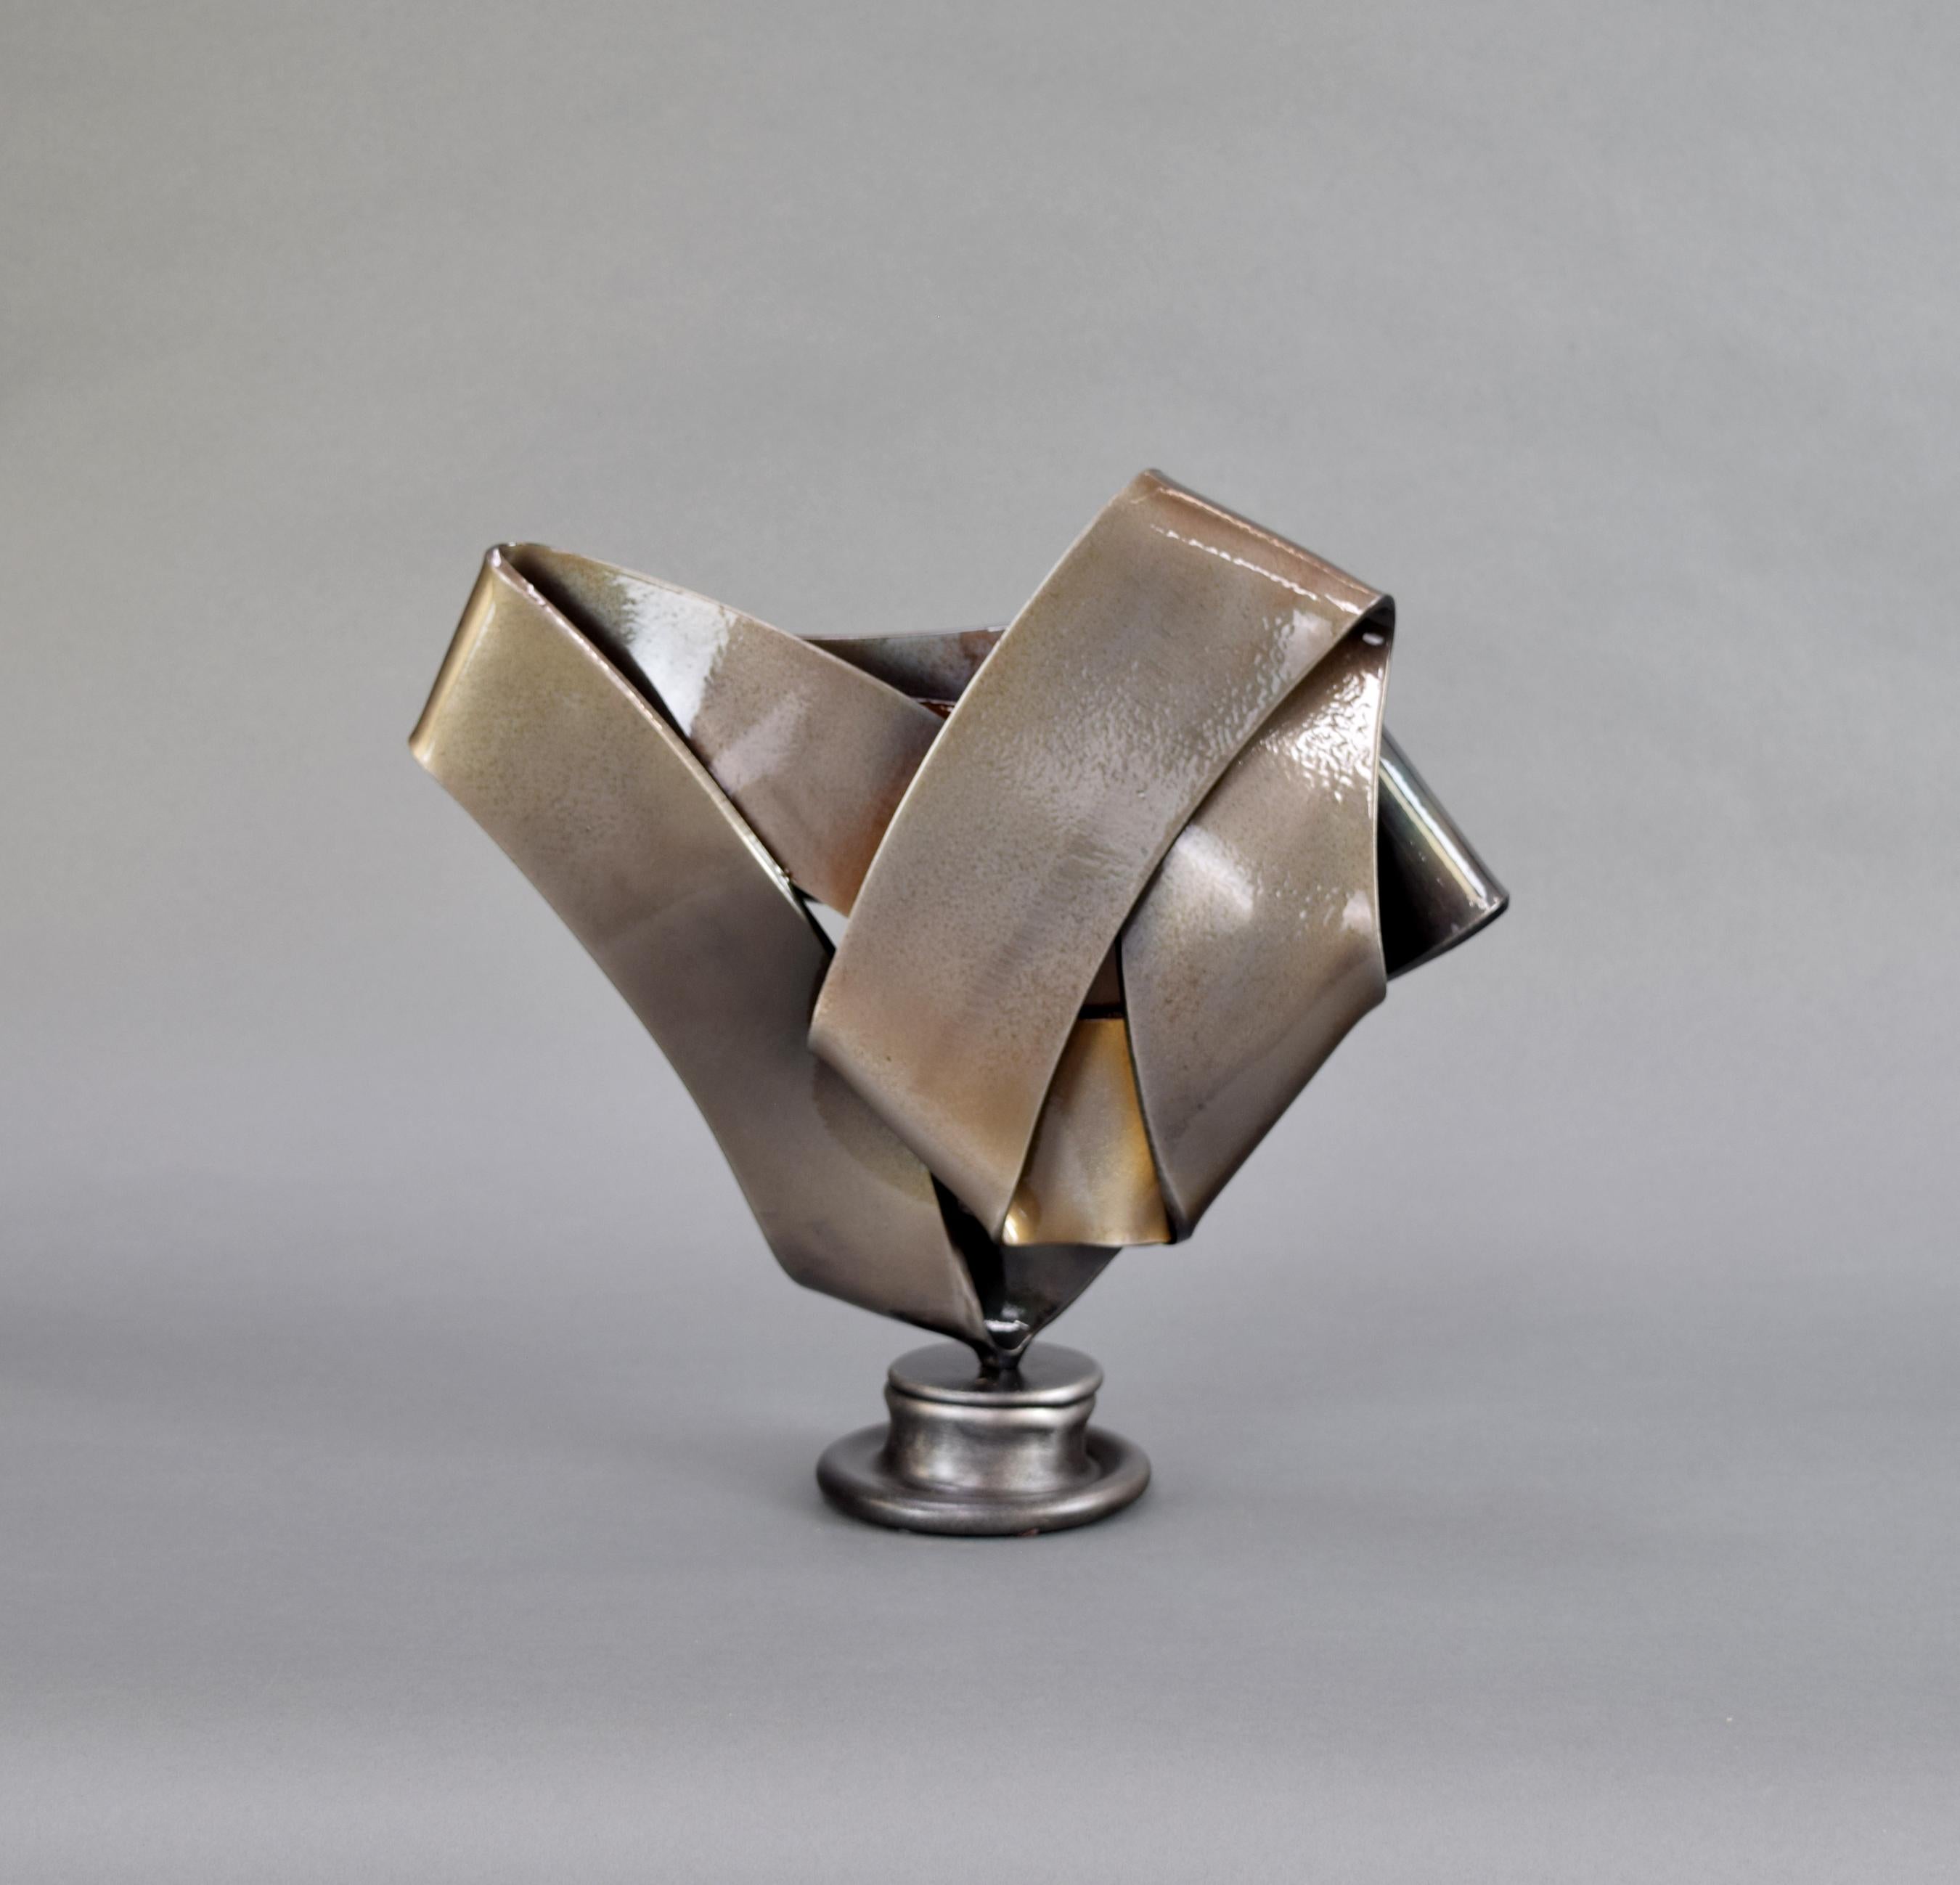 Bret Price Abstract Sculpture - Folded Over